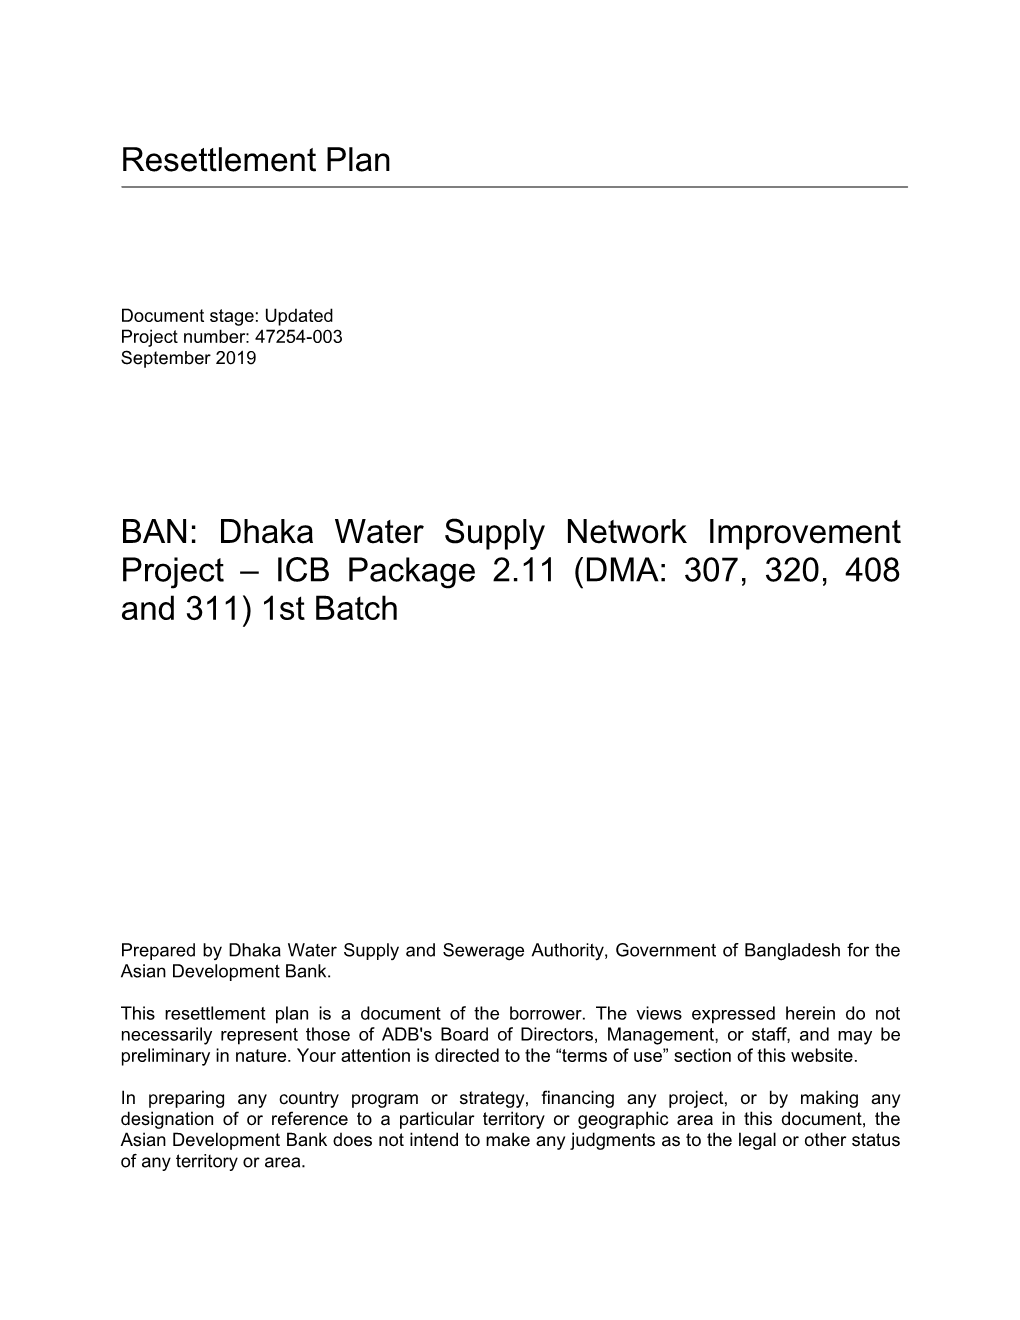 Dhaka Water Supply Network Improvement Project – ICB Package 2.11 (DMA: 307, 320, 408 and 311) 1St Batch